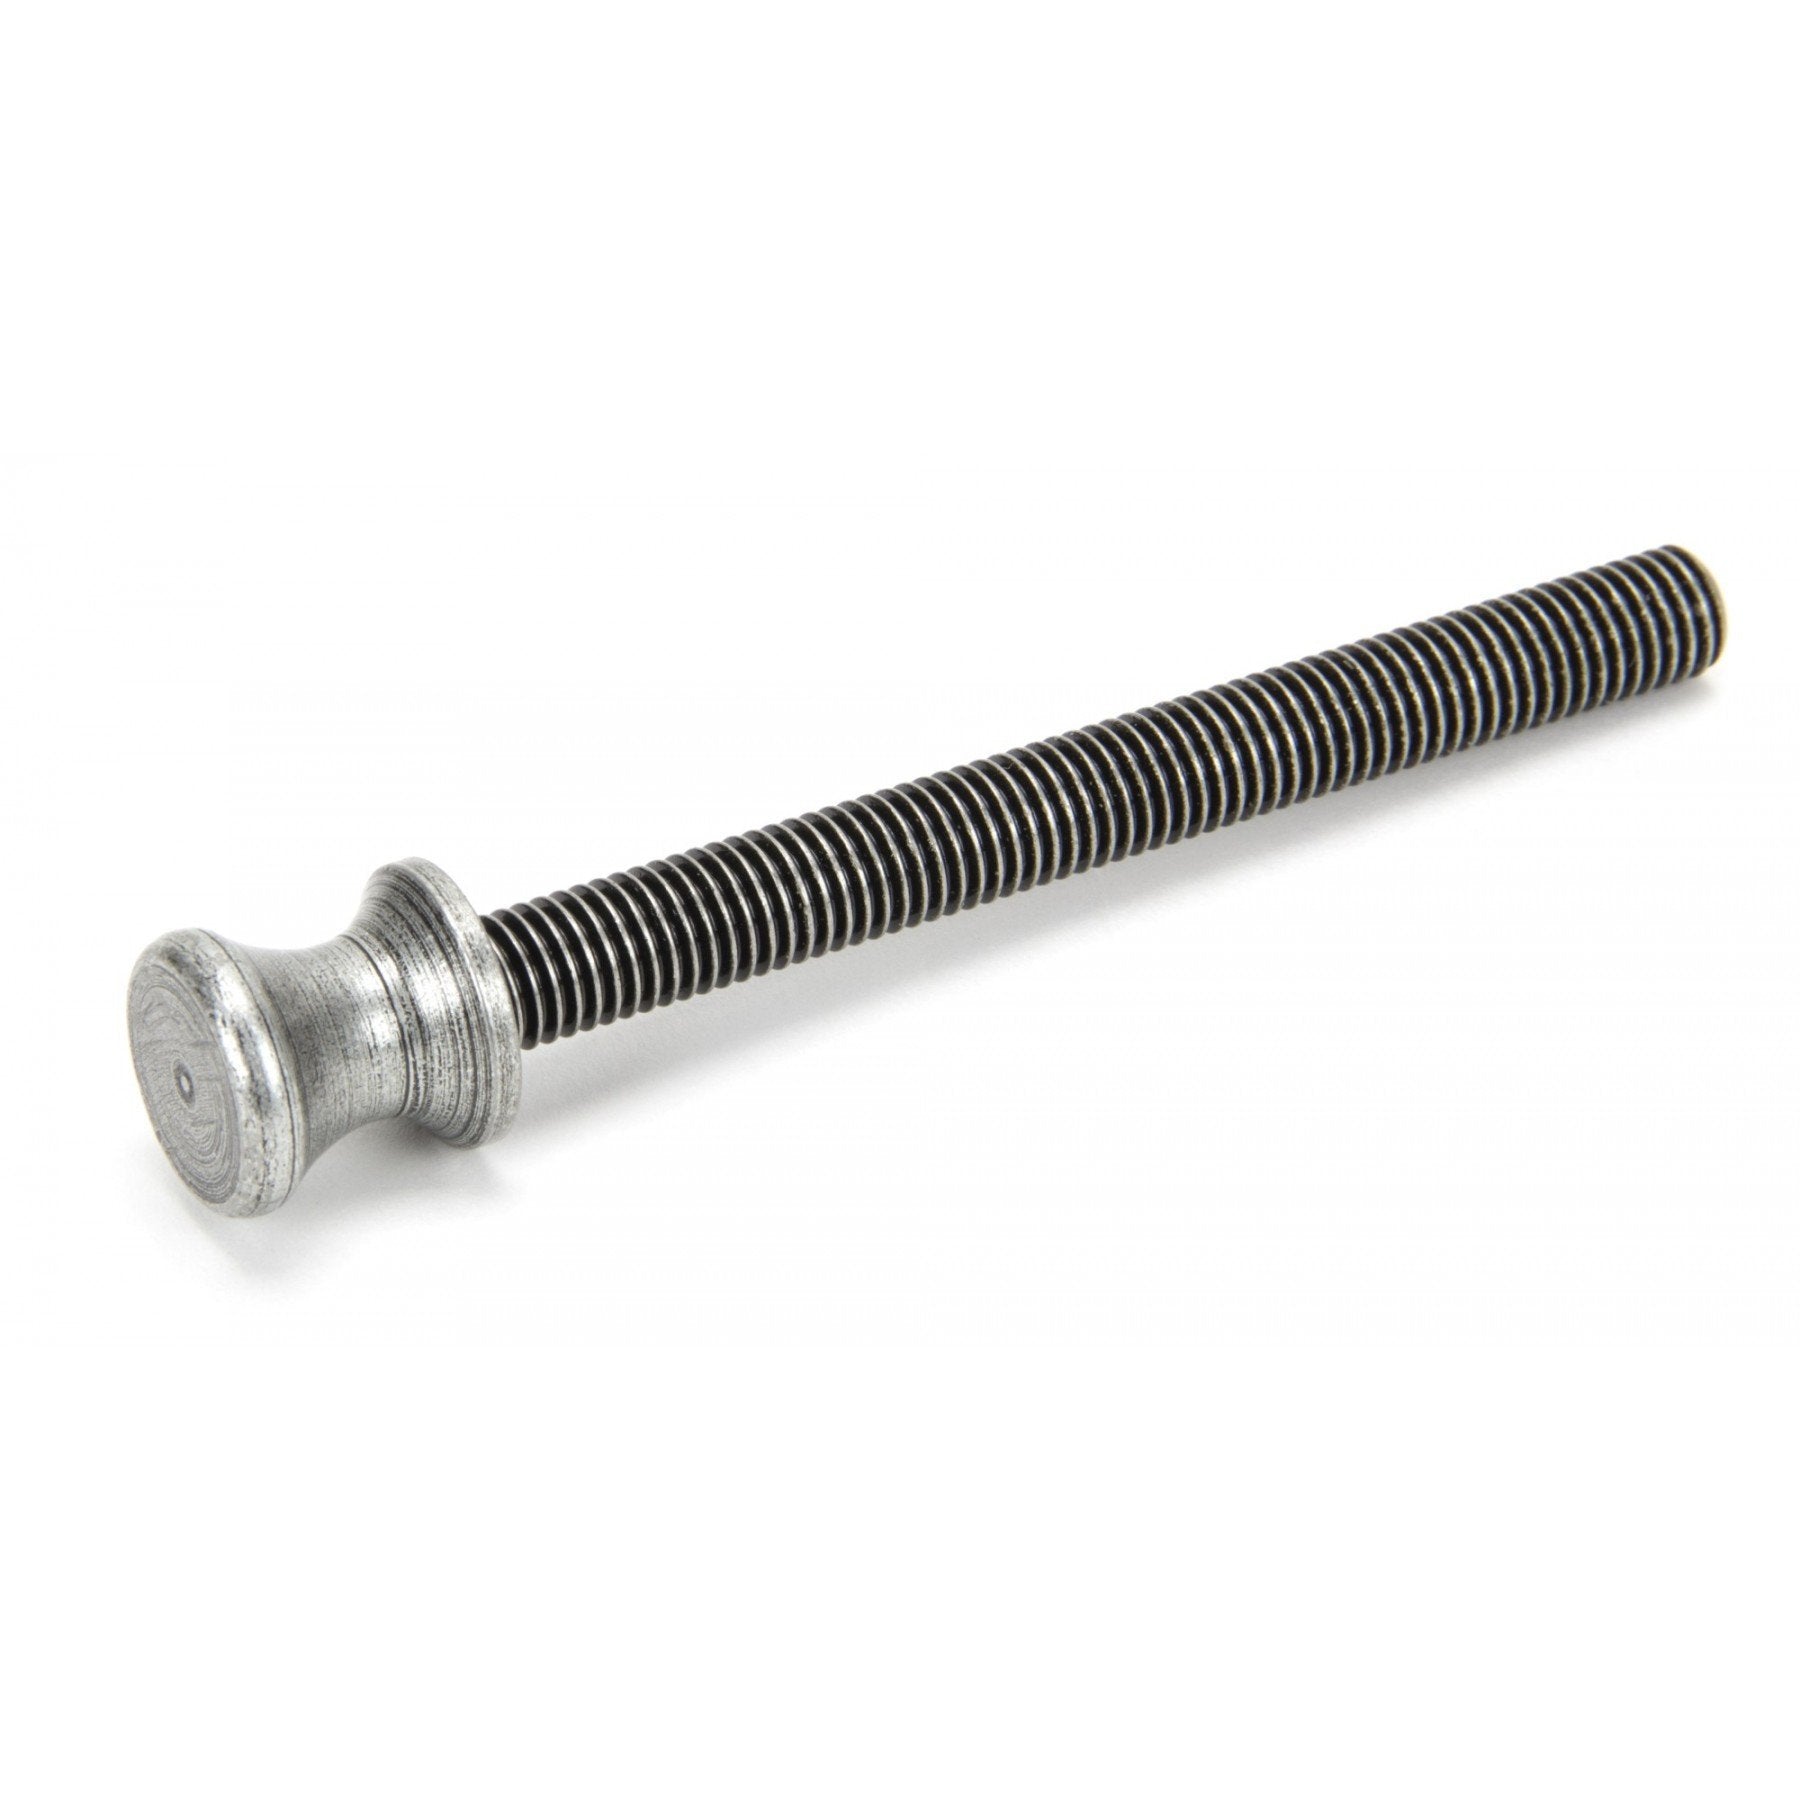 From the Anvil Pewter ended SS M10 110mm Threaded Bar